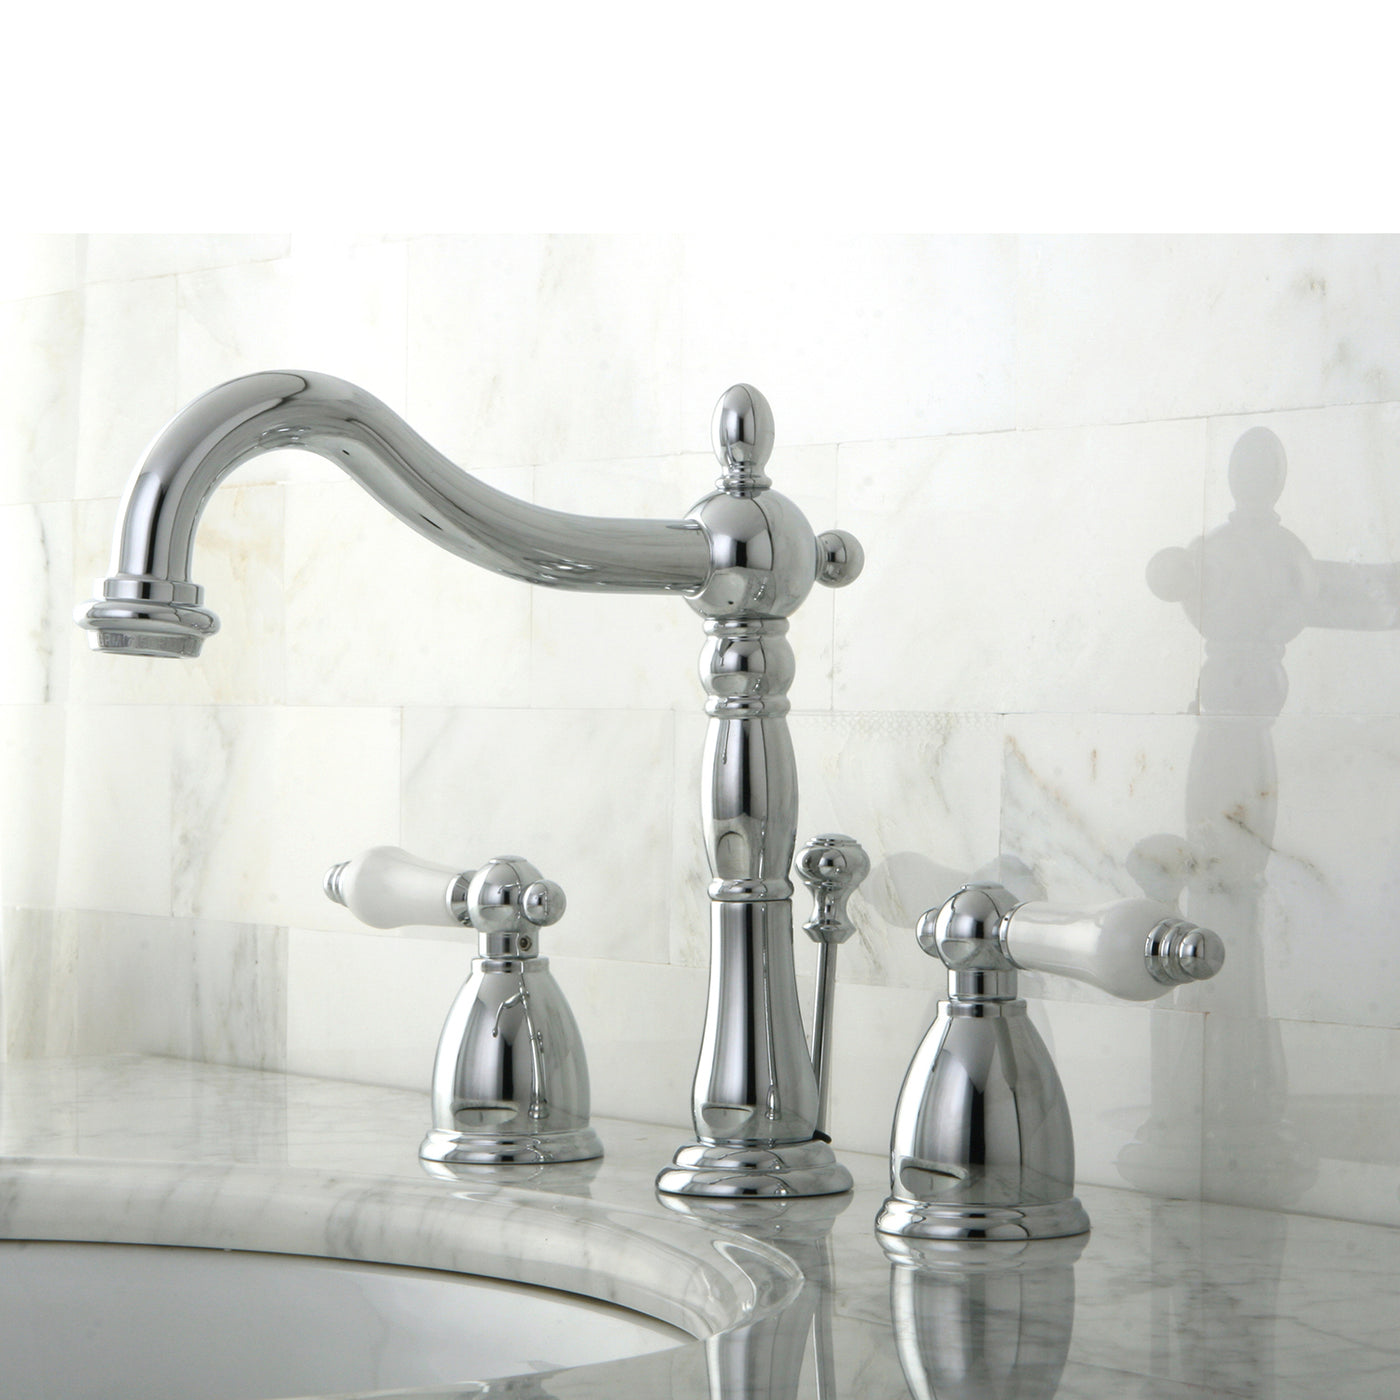 Elements of Design EB1971PL Widespread Bathroom Faucet with Plastic Pop-Up, Polished Chrome